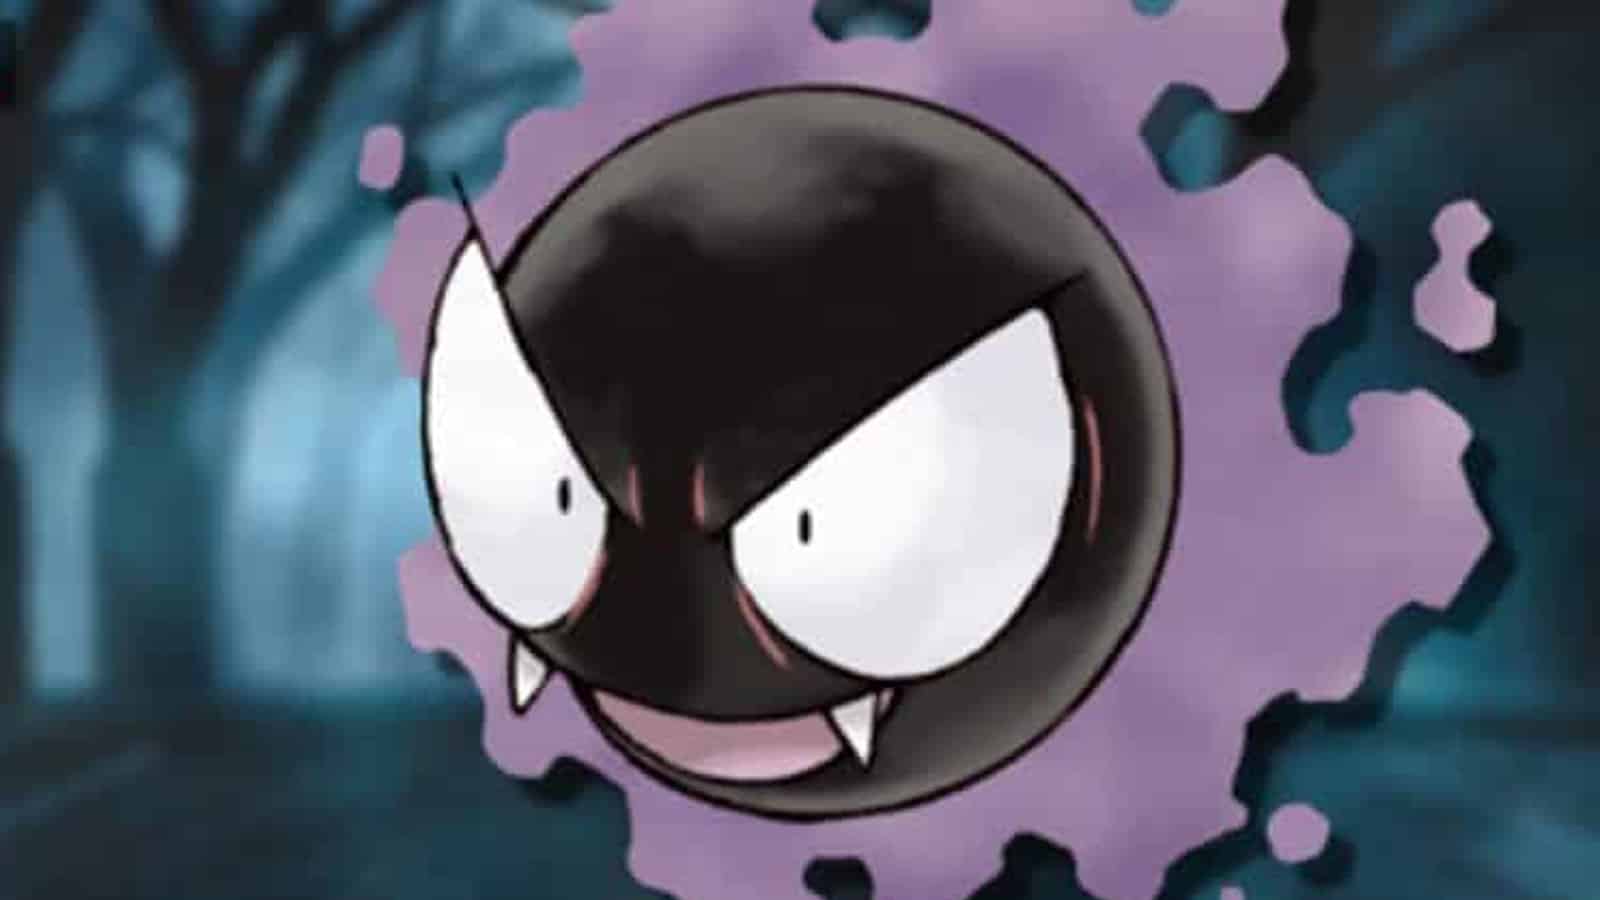 Ghastly Pokemon Ghost-type who has weaknesses.